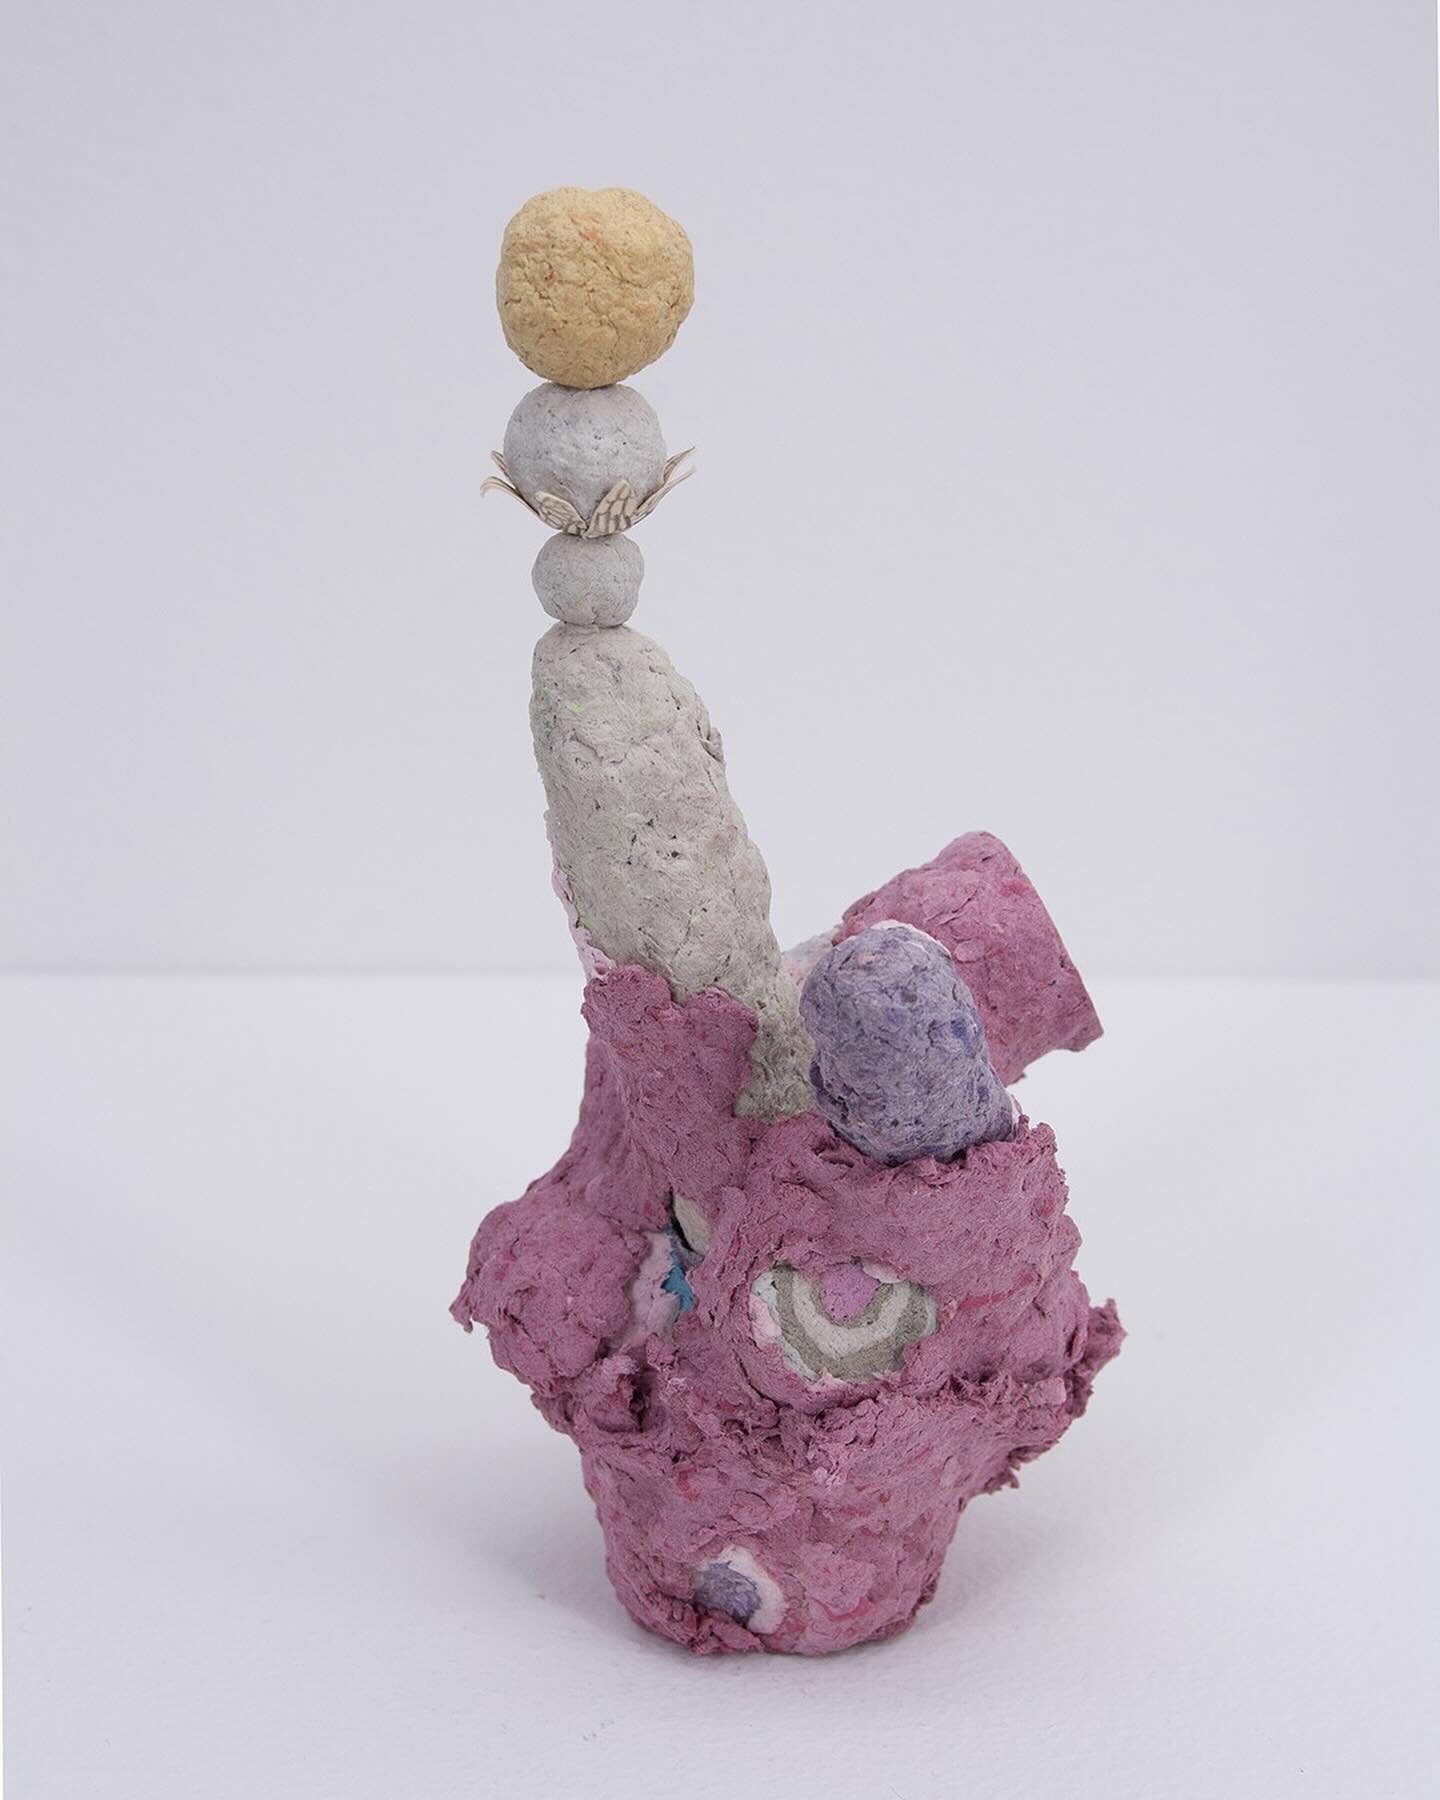 Small Trophy, 2024, paper pulp (recycled failed drawings and other papers), 6.25 x 3.25 x 2.75 inches
.
.
.
.
.
#recycledpaper #pulp #paperpulp #papersculpture #handmadepaper #paperartist #paperart #papersculpture #contemporarysculpture #nodyesadded